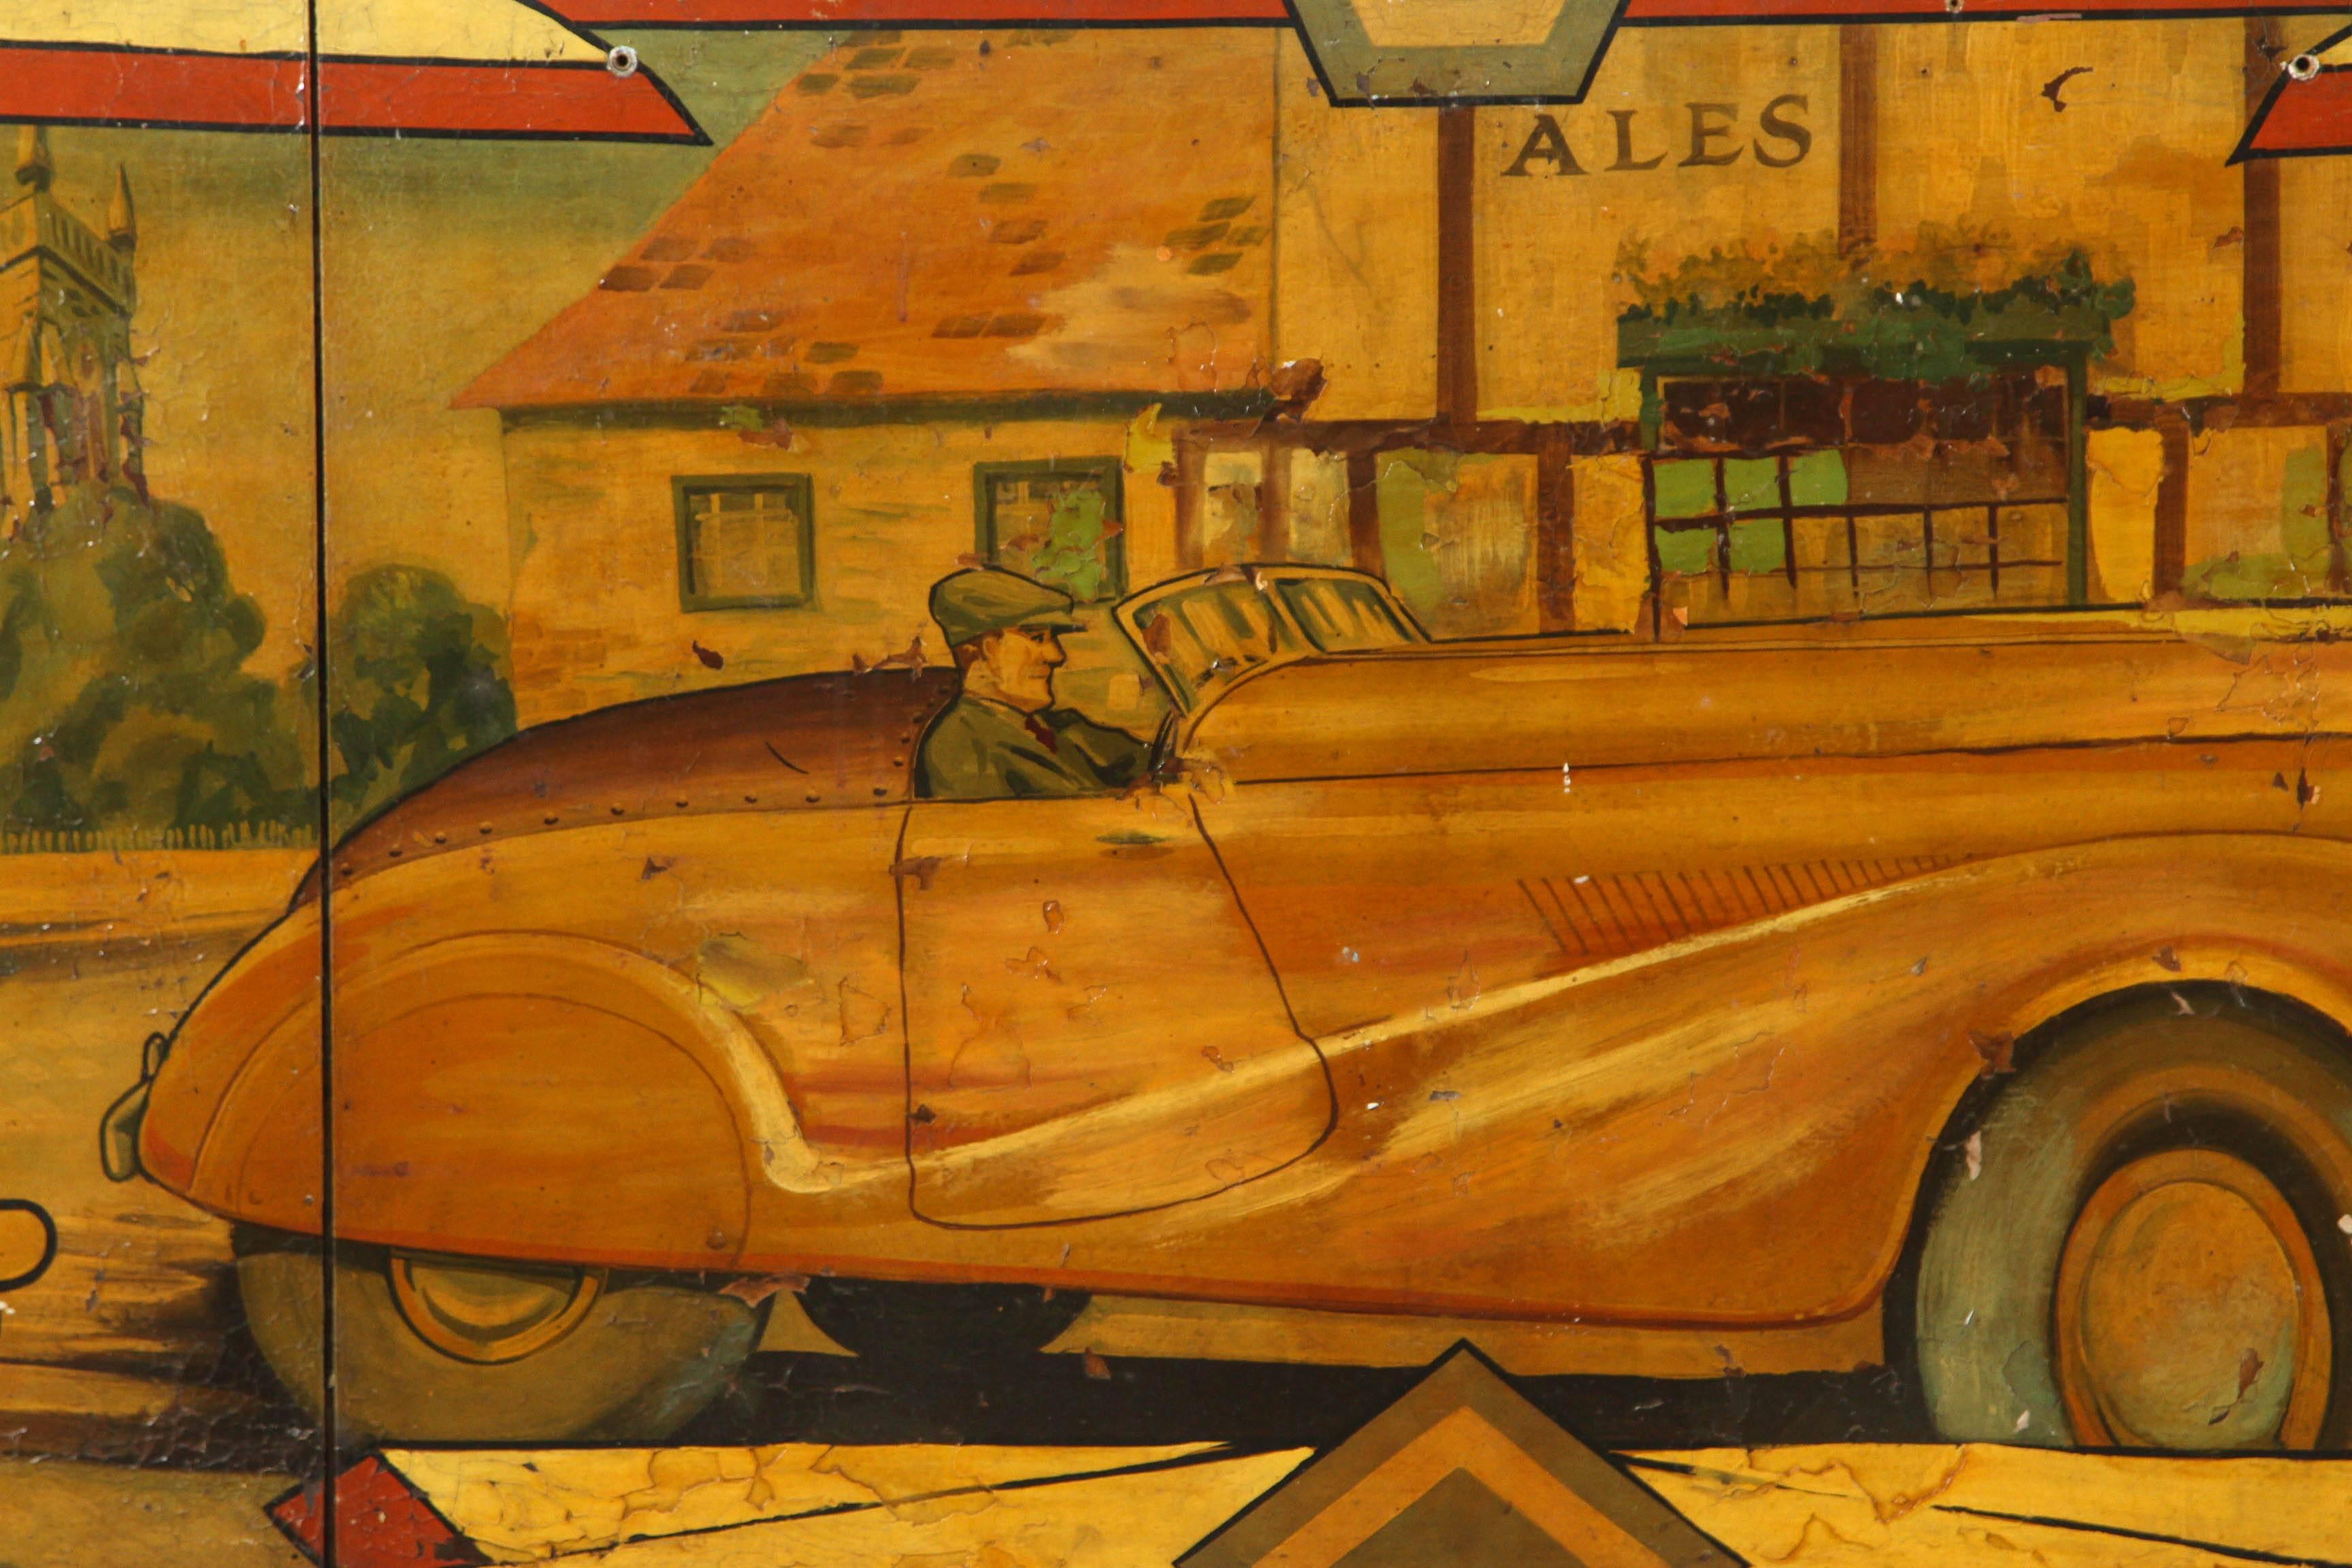 Fantastic early hand-painted carnival rounding board with a great automobile and pub theme. Most likely from the UK and likely Spooner. This would have been one of a series of panels that would be installed around the upper part of the ride. Please